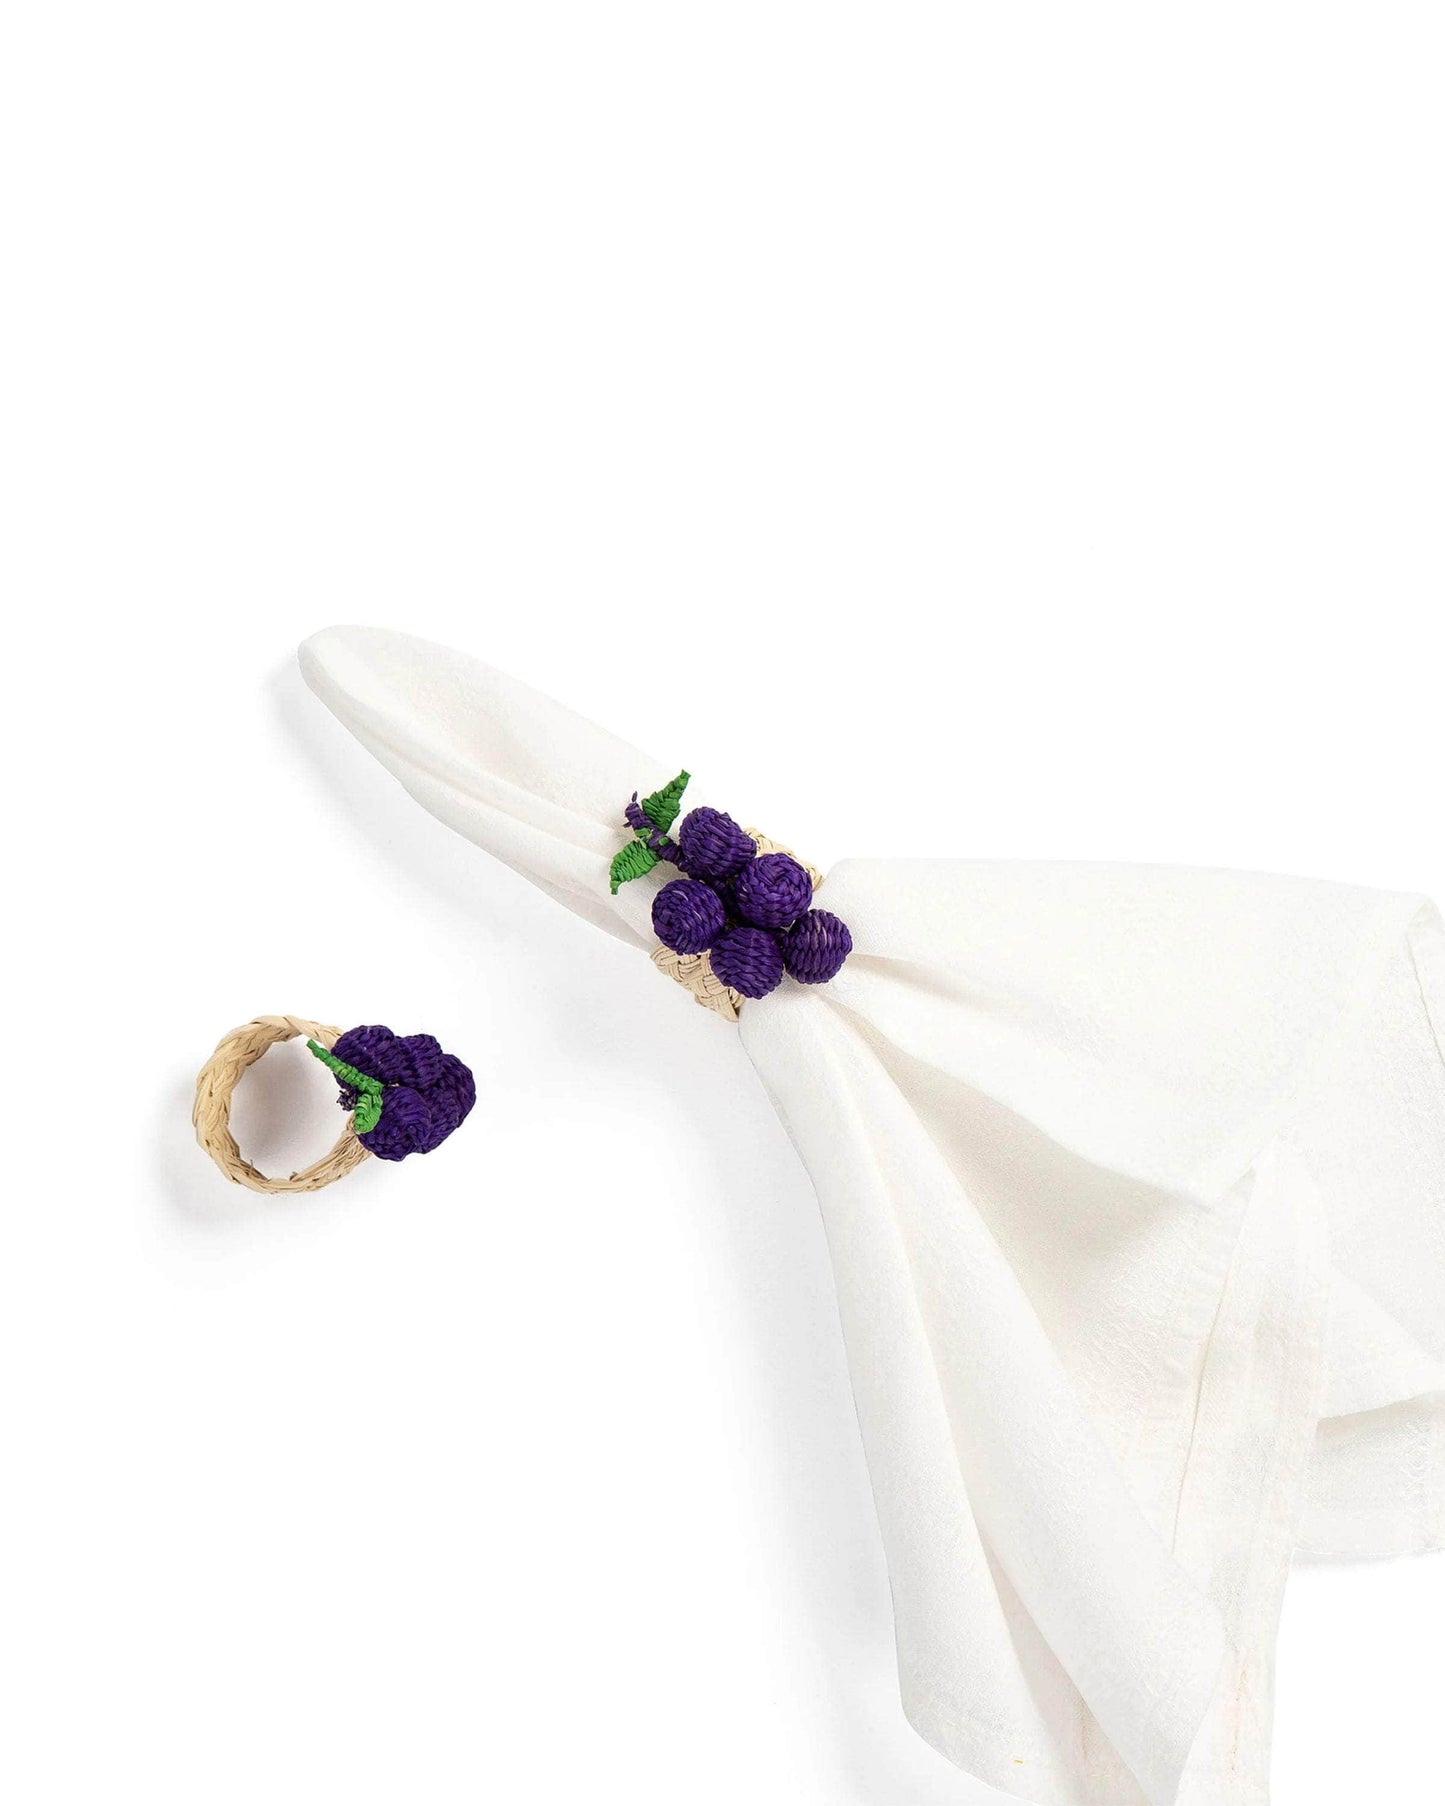 Load image into Gallery viewer, Napkin Rings (set of 4)
